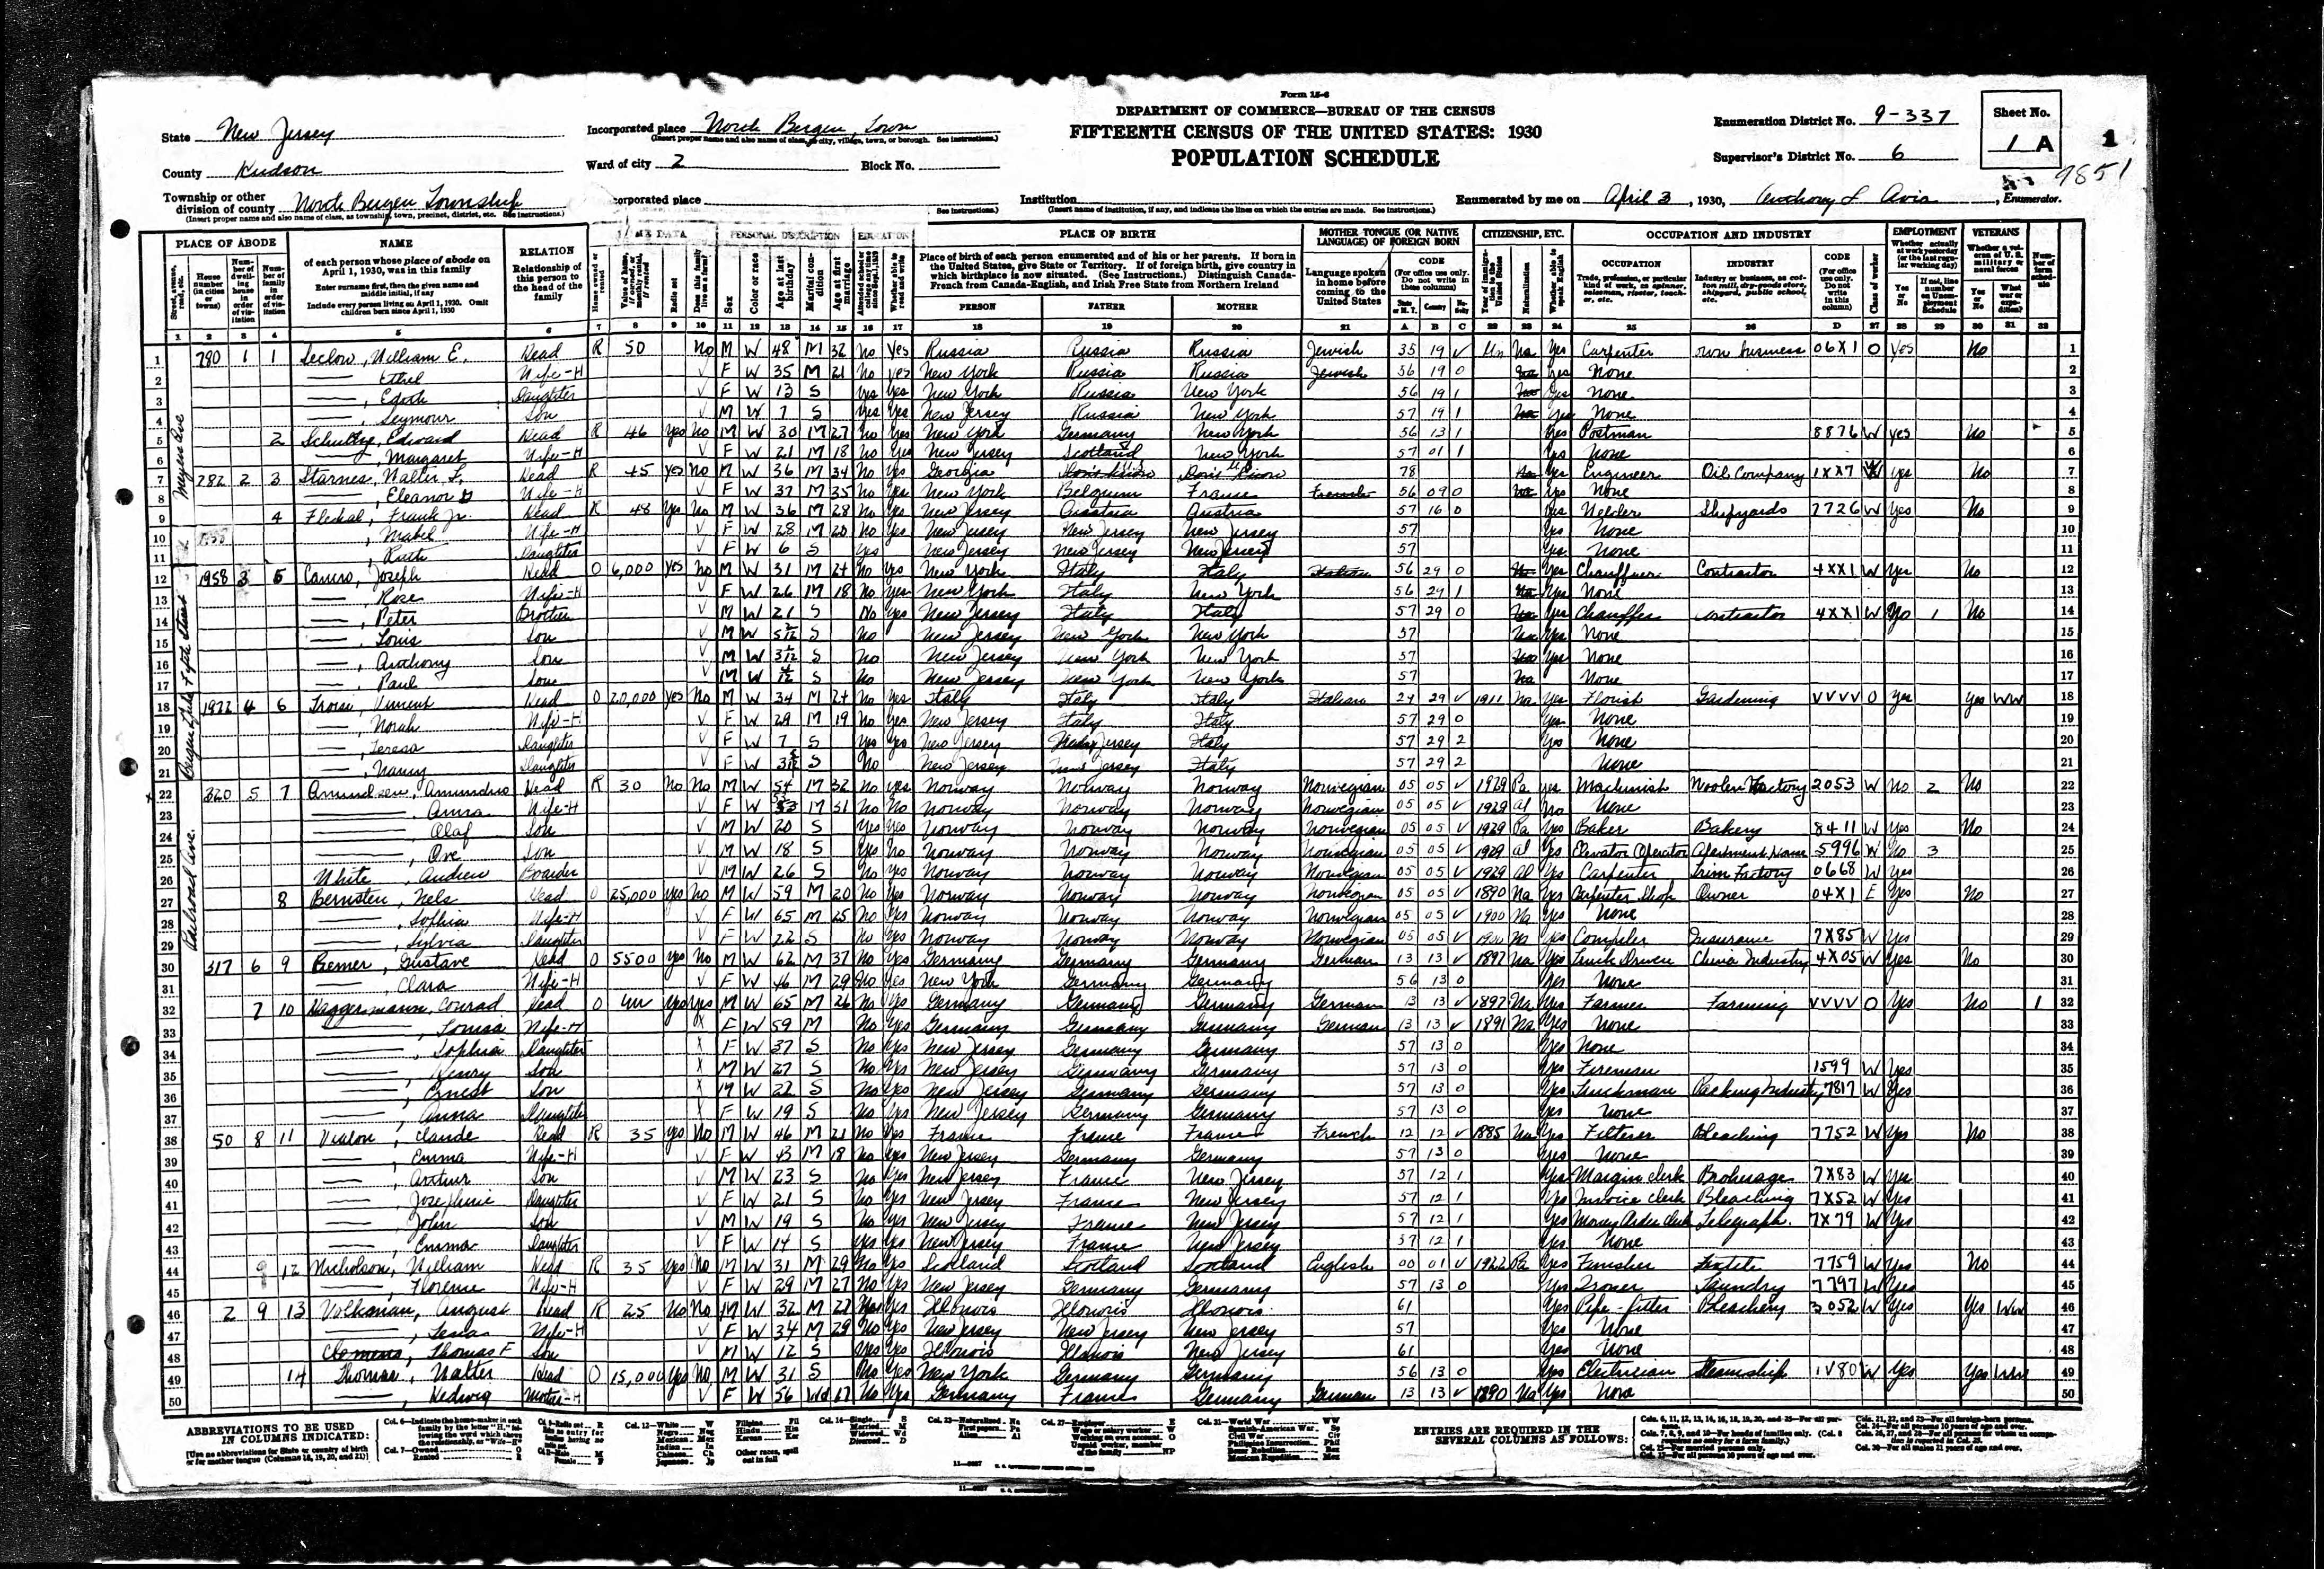 U.S. Census for North Bergen Township, Hudson County, New Jersey 1930